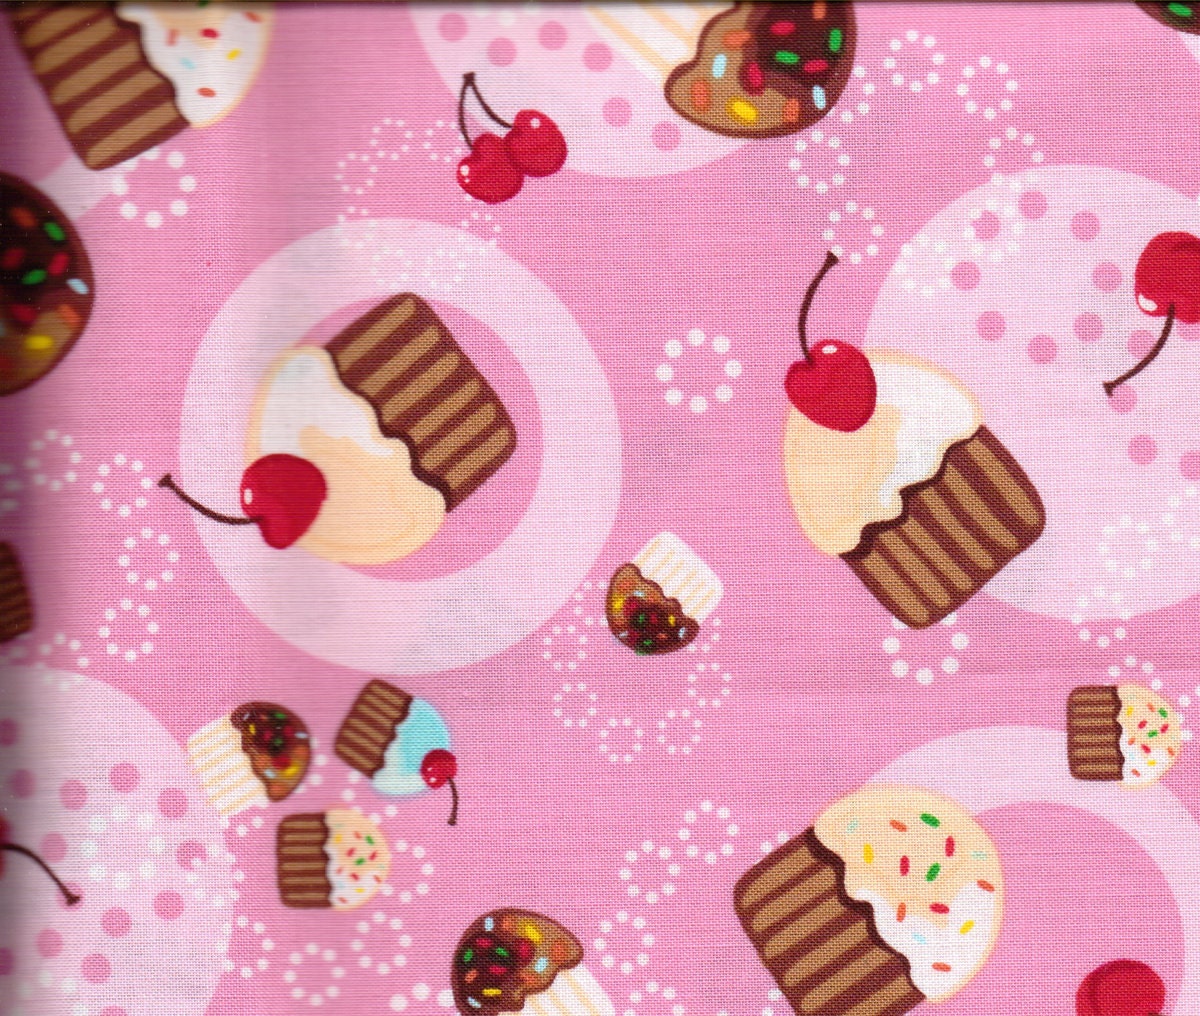 Fabric Fat Quarters Robert Kaufman Confections  Cupcakes on Pink